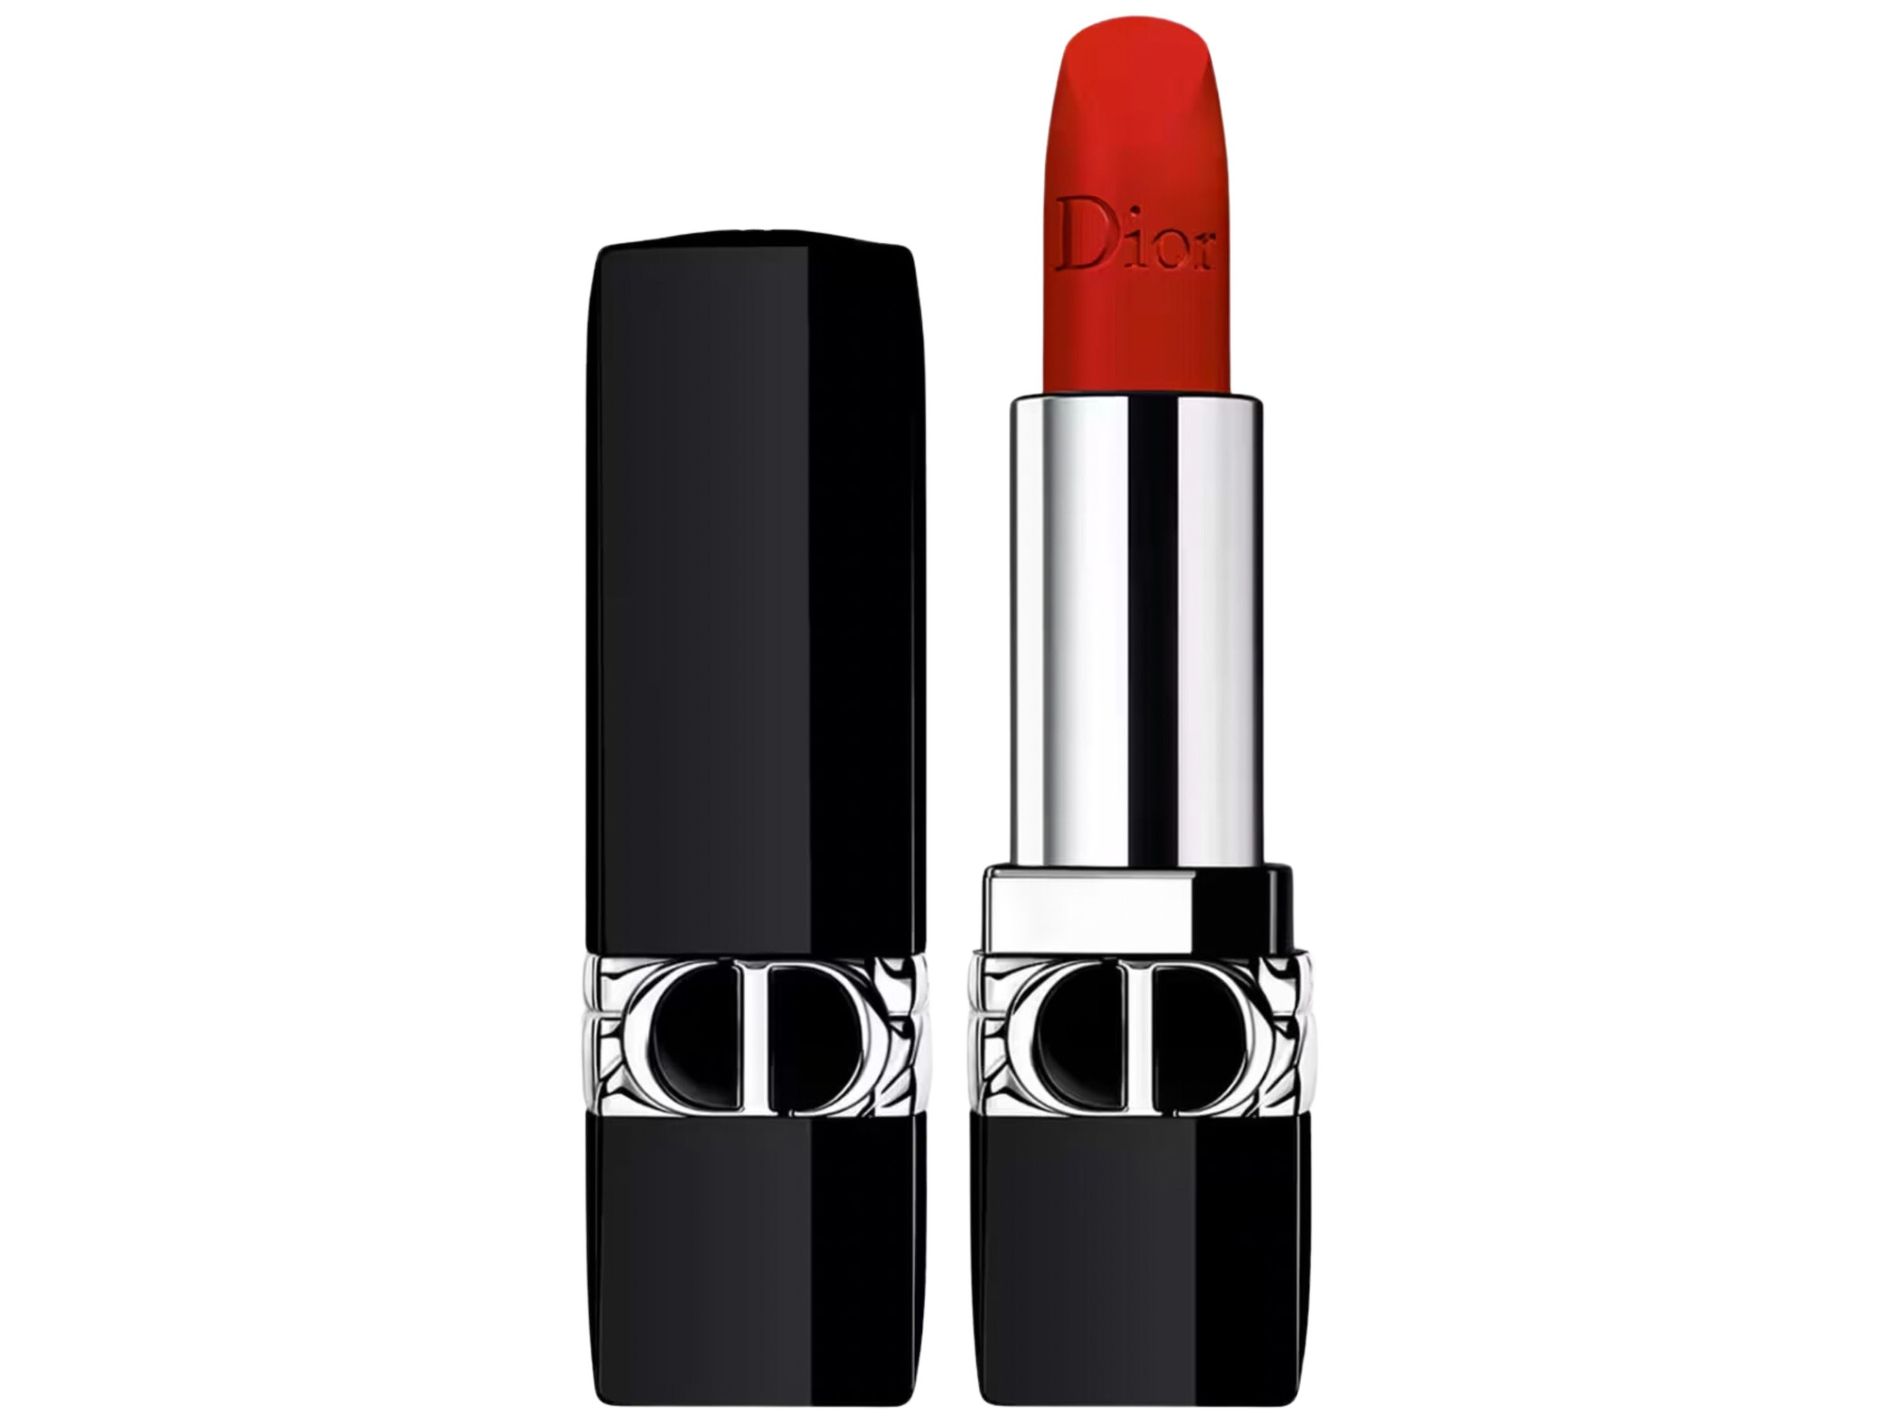 Top best red lipsticks tried & tested by Vogue Scandinavia editors